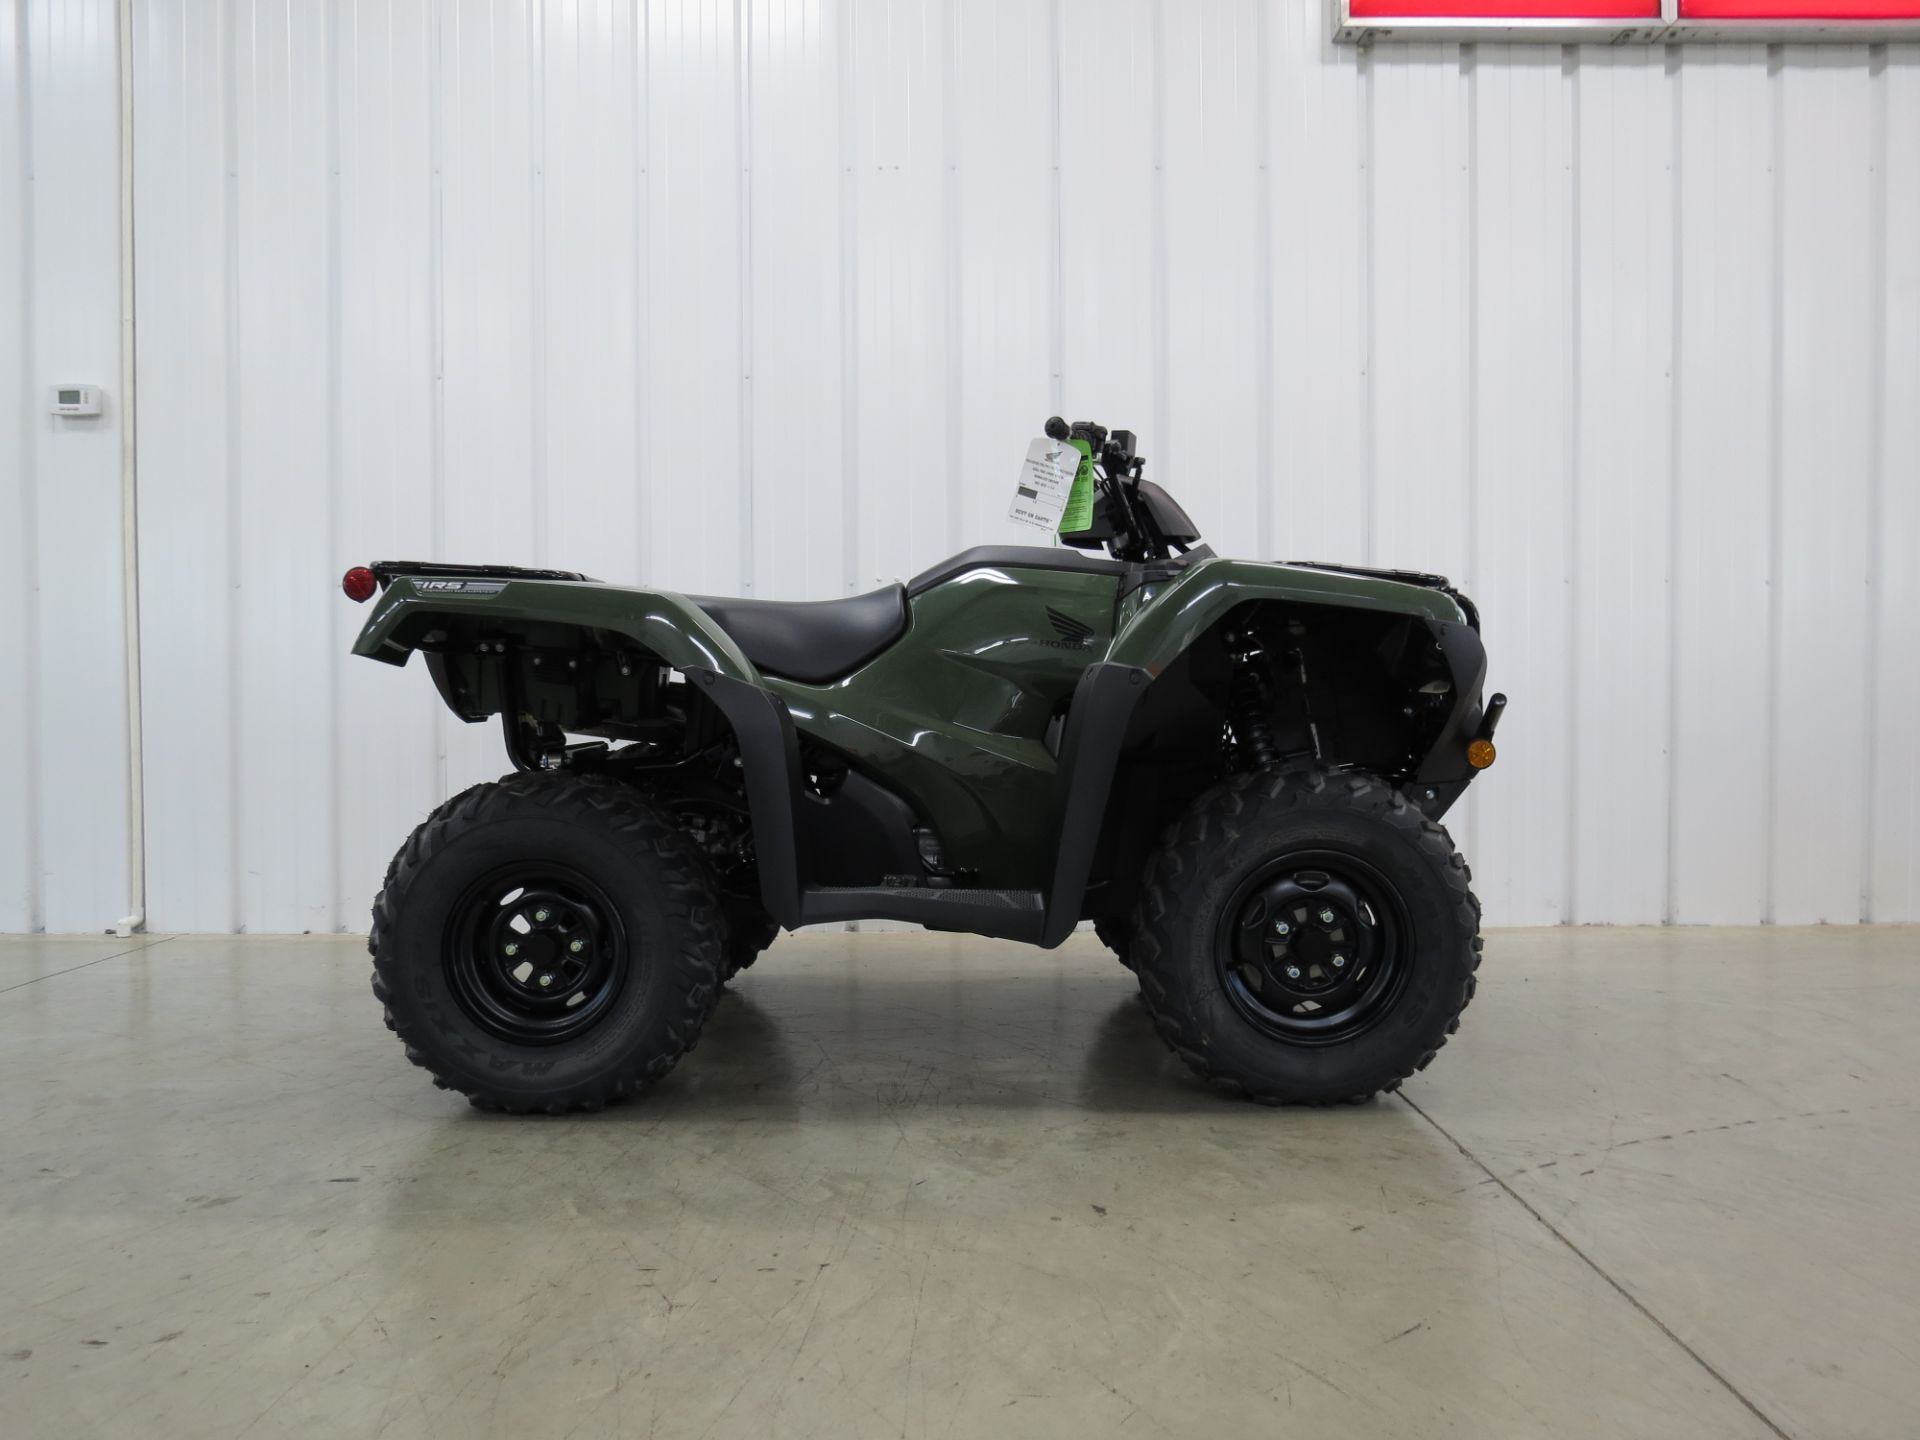 2022 Honda FourTrax Rancher 4x4 Automatic DCT IRS in Lima, Ohio - Photo 1